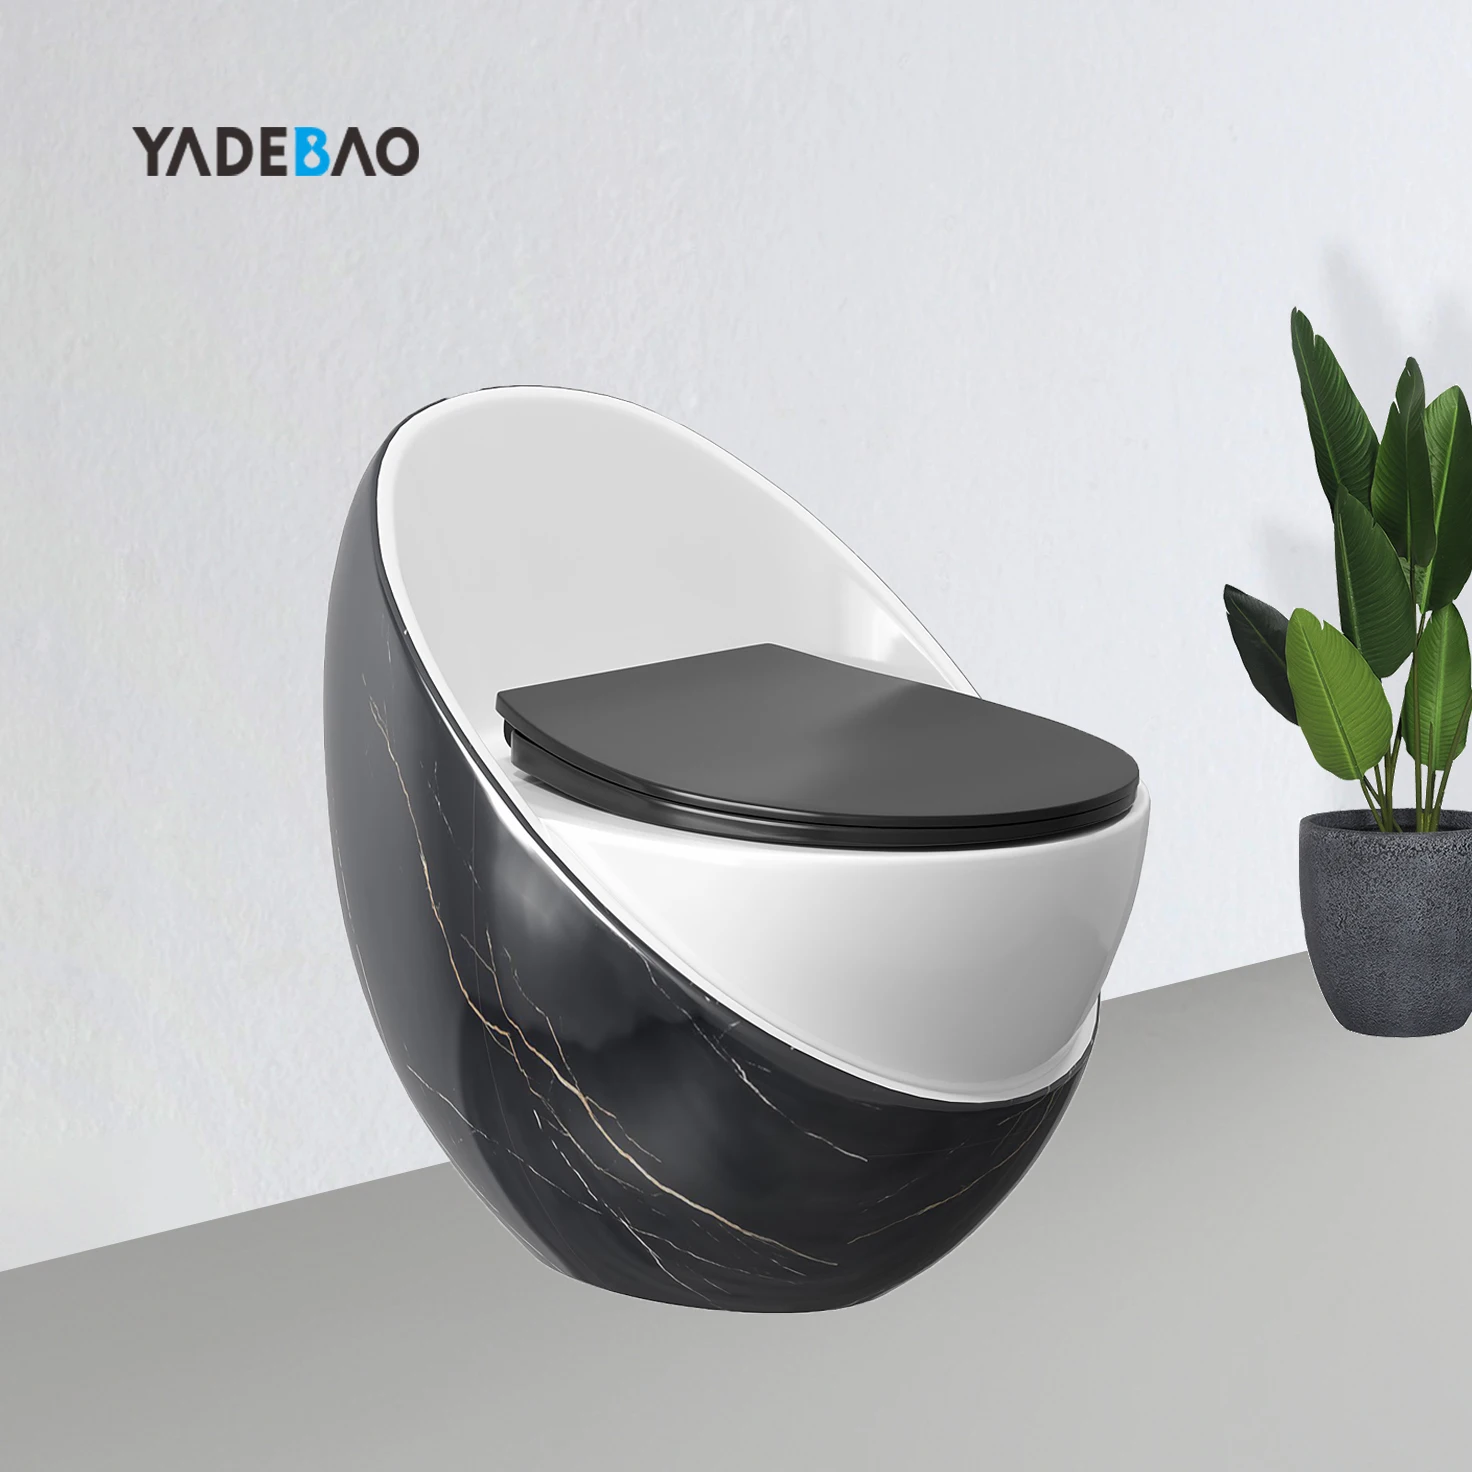 Wholesale Hotel Floor Mounted Egg Shape Toilet Bowl Ceramic Sanitary Ware Bathroom WC Commode One Piece Black Marble Toilets